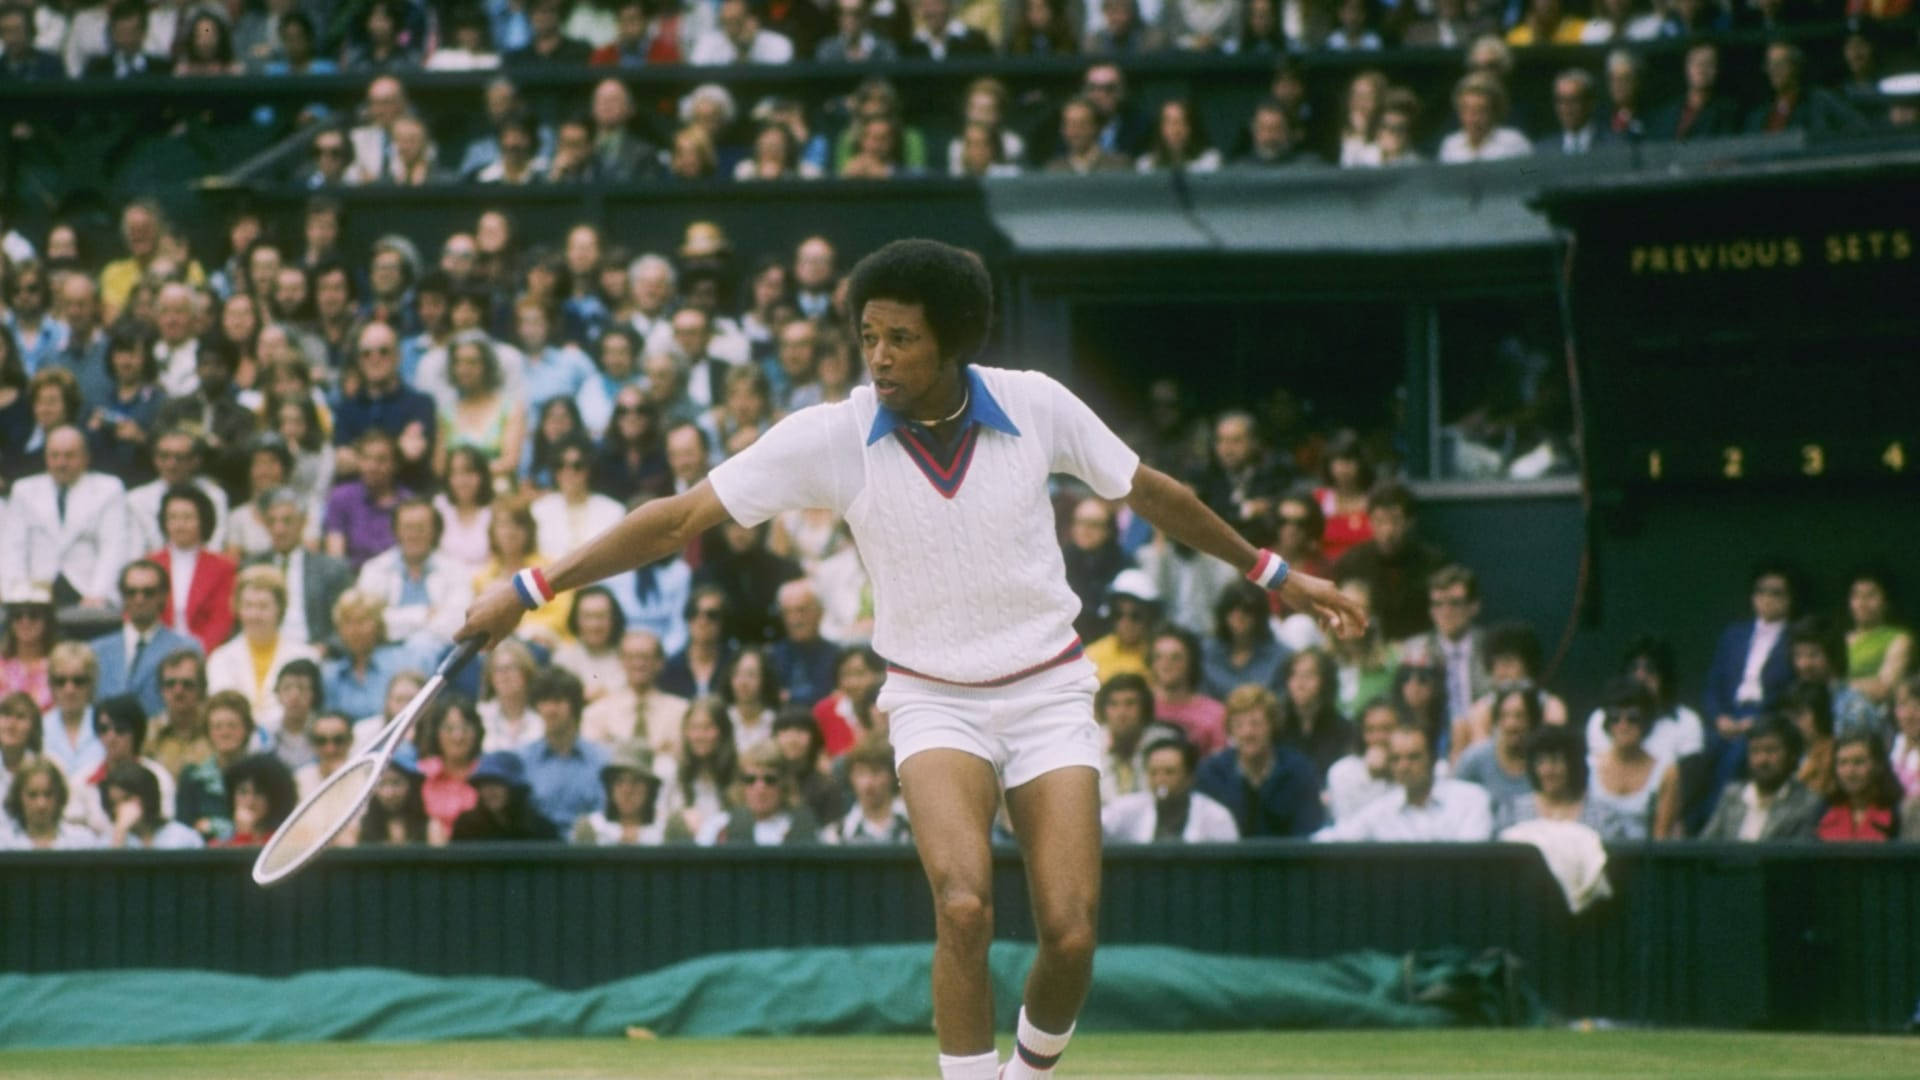 The legendary Arthur Ashe, mastering tennis with passion Wallpaper